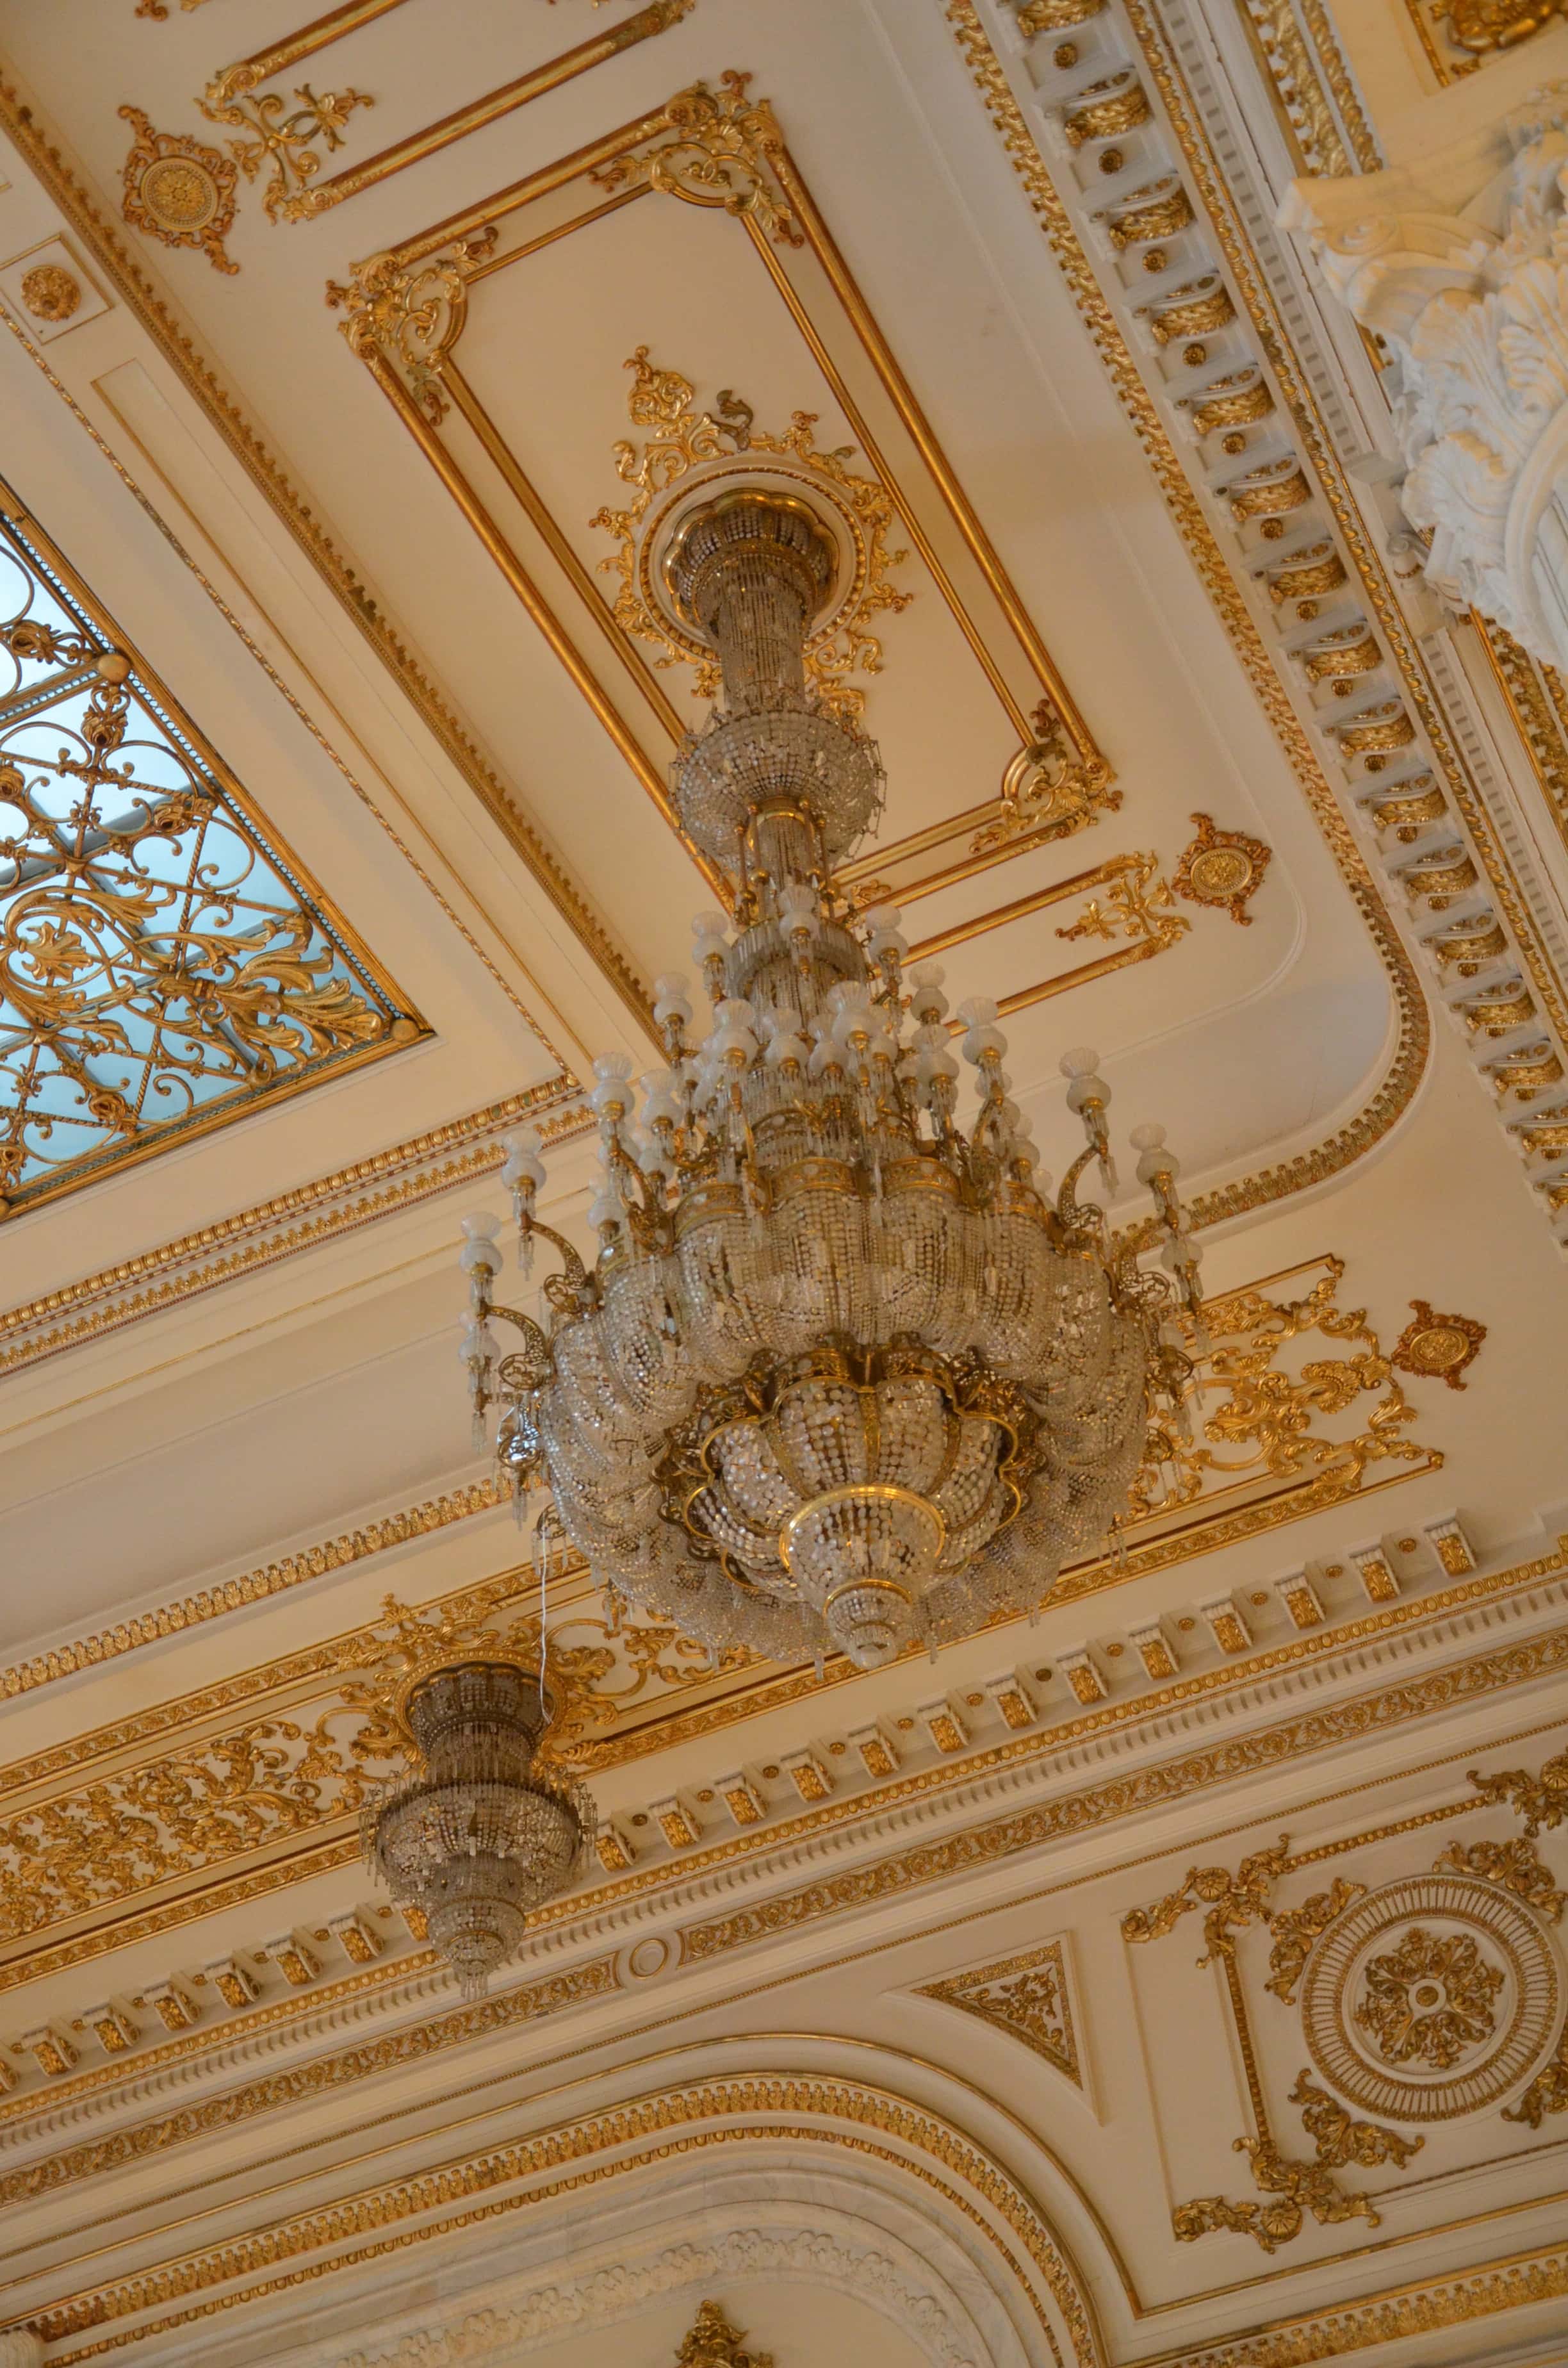 Chandelier in Unification Hall